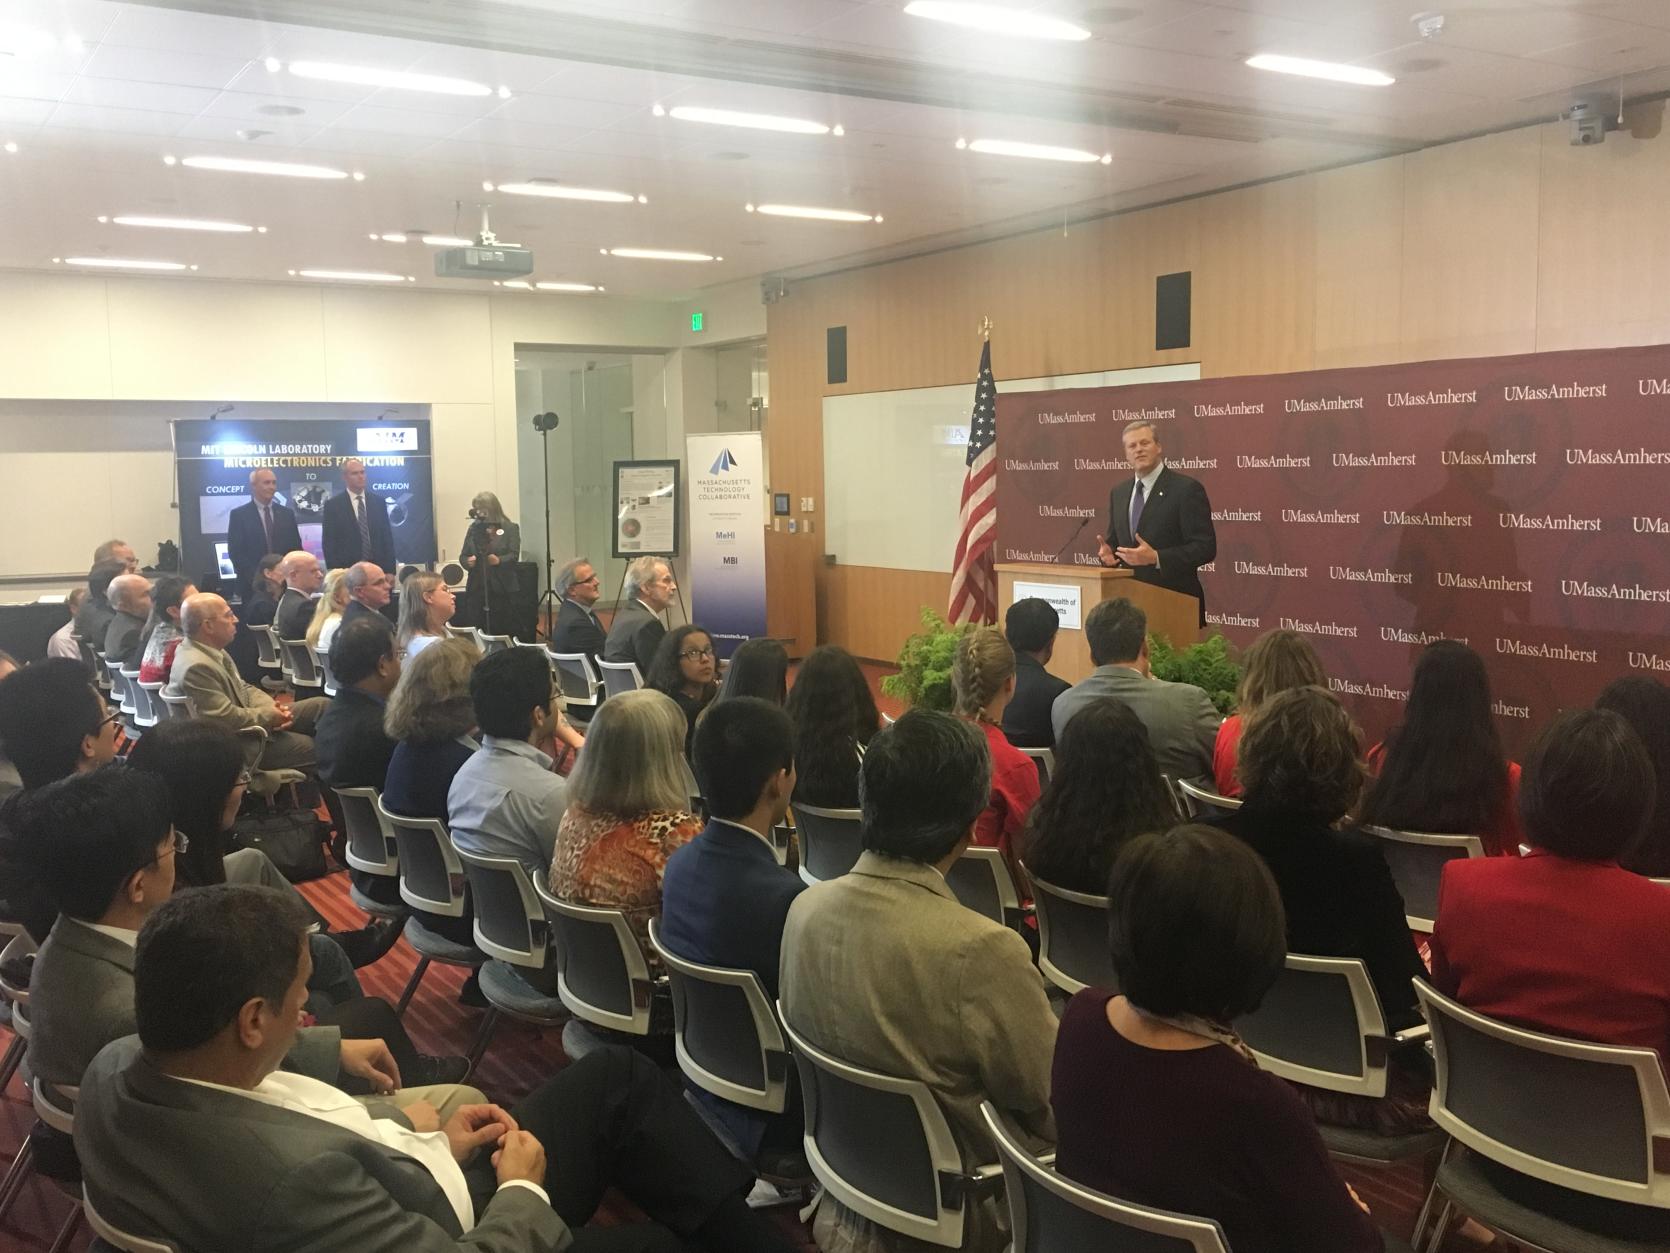 Governor Baker speaking during grant announcement at UMass Amherst.